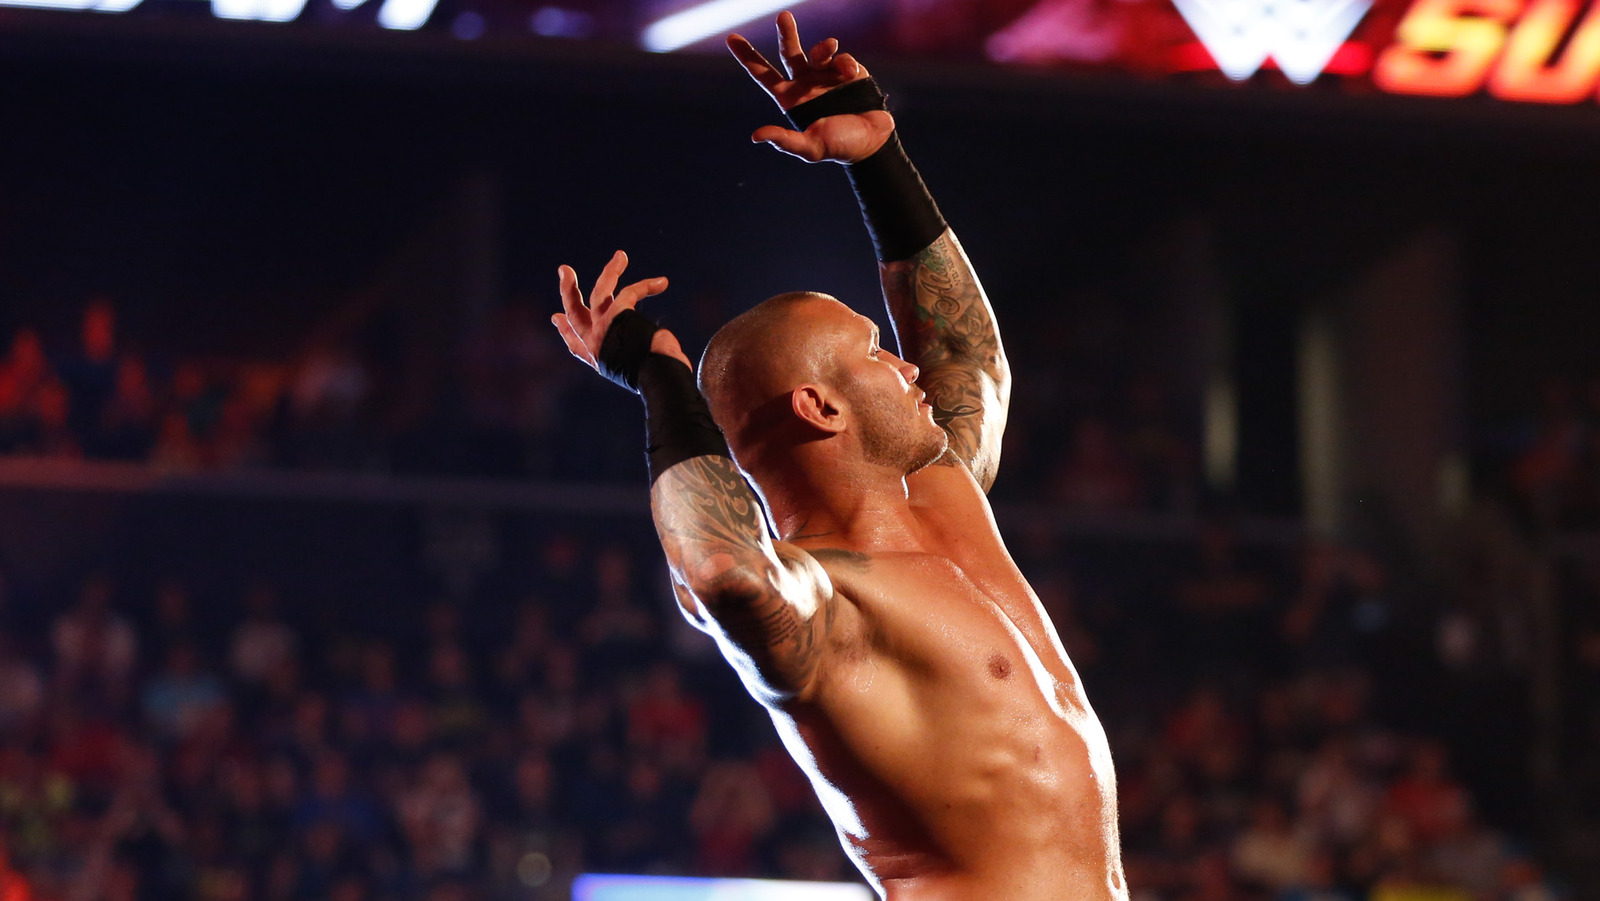 Randy Orton Teases Wrestling For 10 More Years Post-WWE Survivor Series